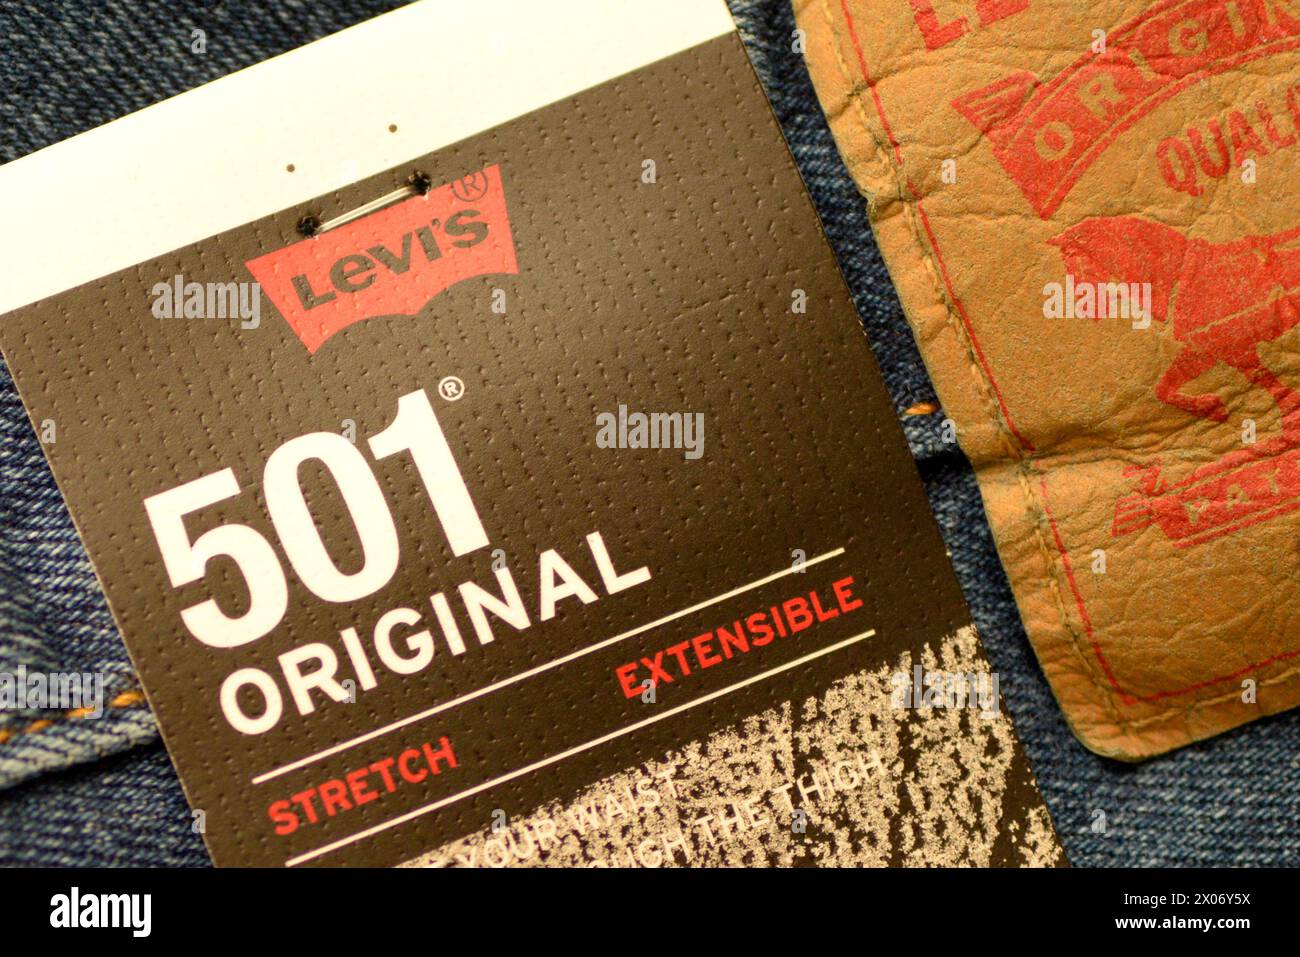 Levi Strauss 501 original stretch extensible jeans paper label close up detail Stock Photo